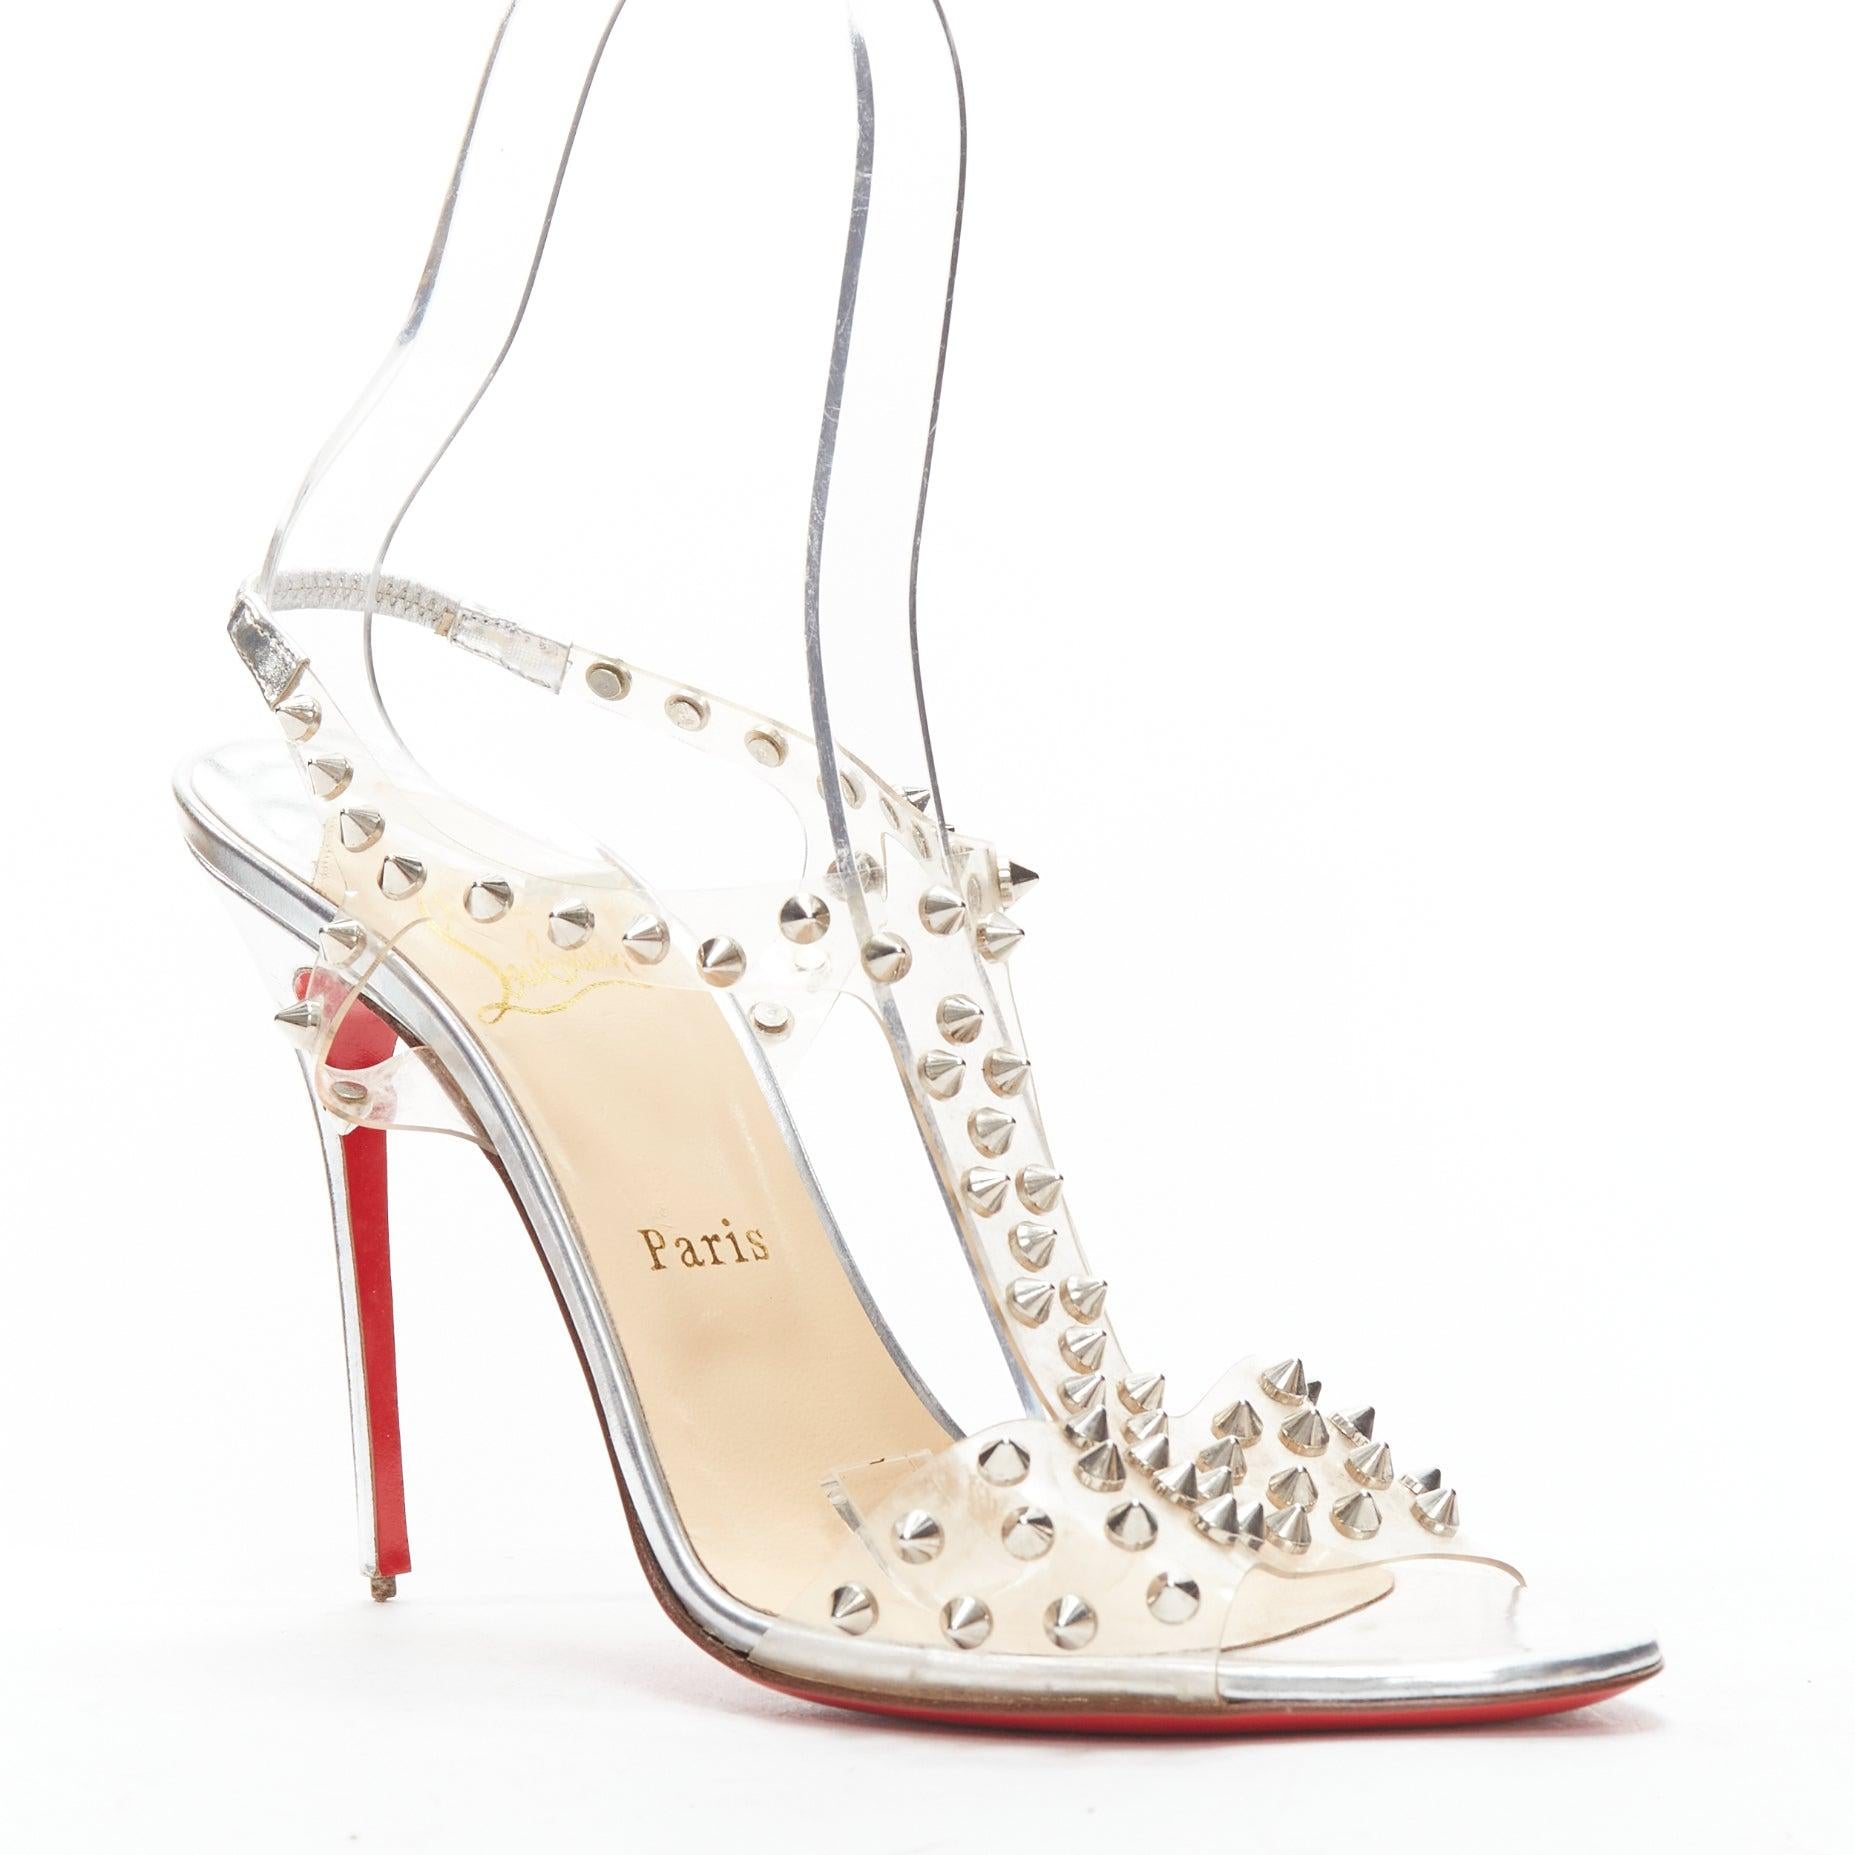 CHRISTIAN LOUBOUTIN J-Lissimo PVC silver spikes T-strap heel EU39.5
Reference: BSHW/A00154
Brand: Christian Louboutin
Model: J-Lissimo 100
Material: PVC, Leather
Color: Clear, Silver
Pattern: Solid
Closure: Elasticated
Lining: Nude Leather
Extra